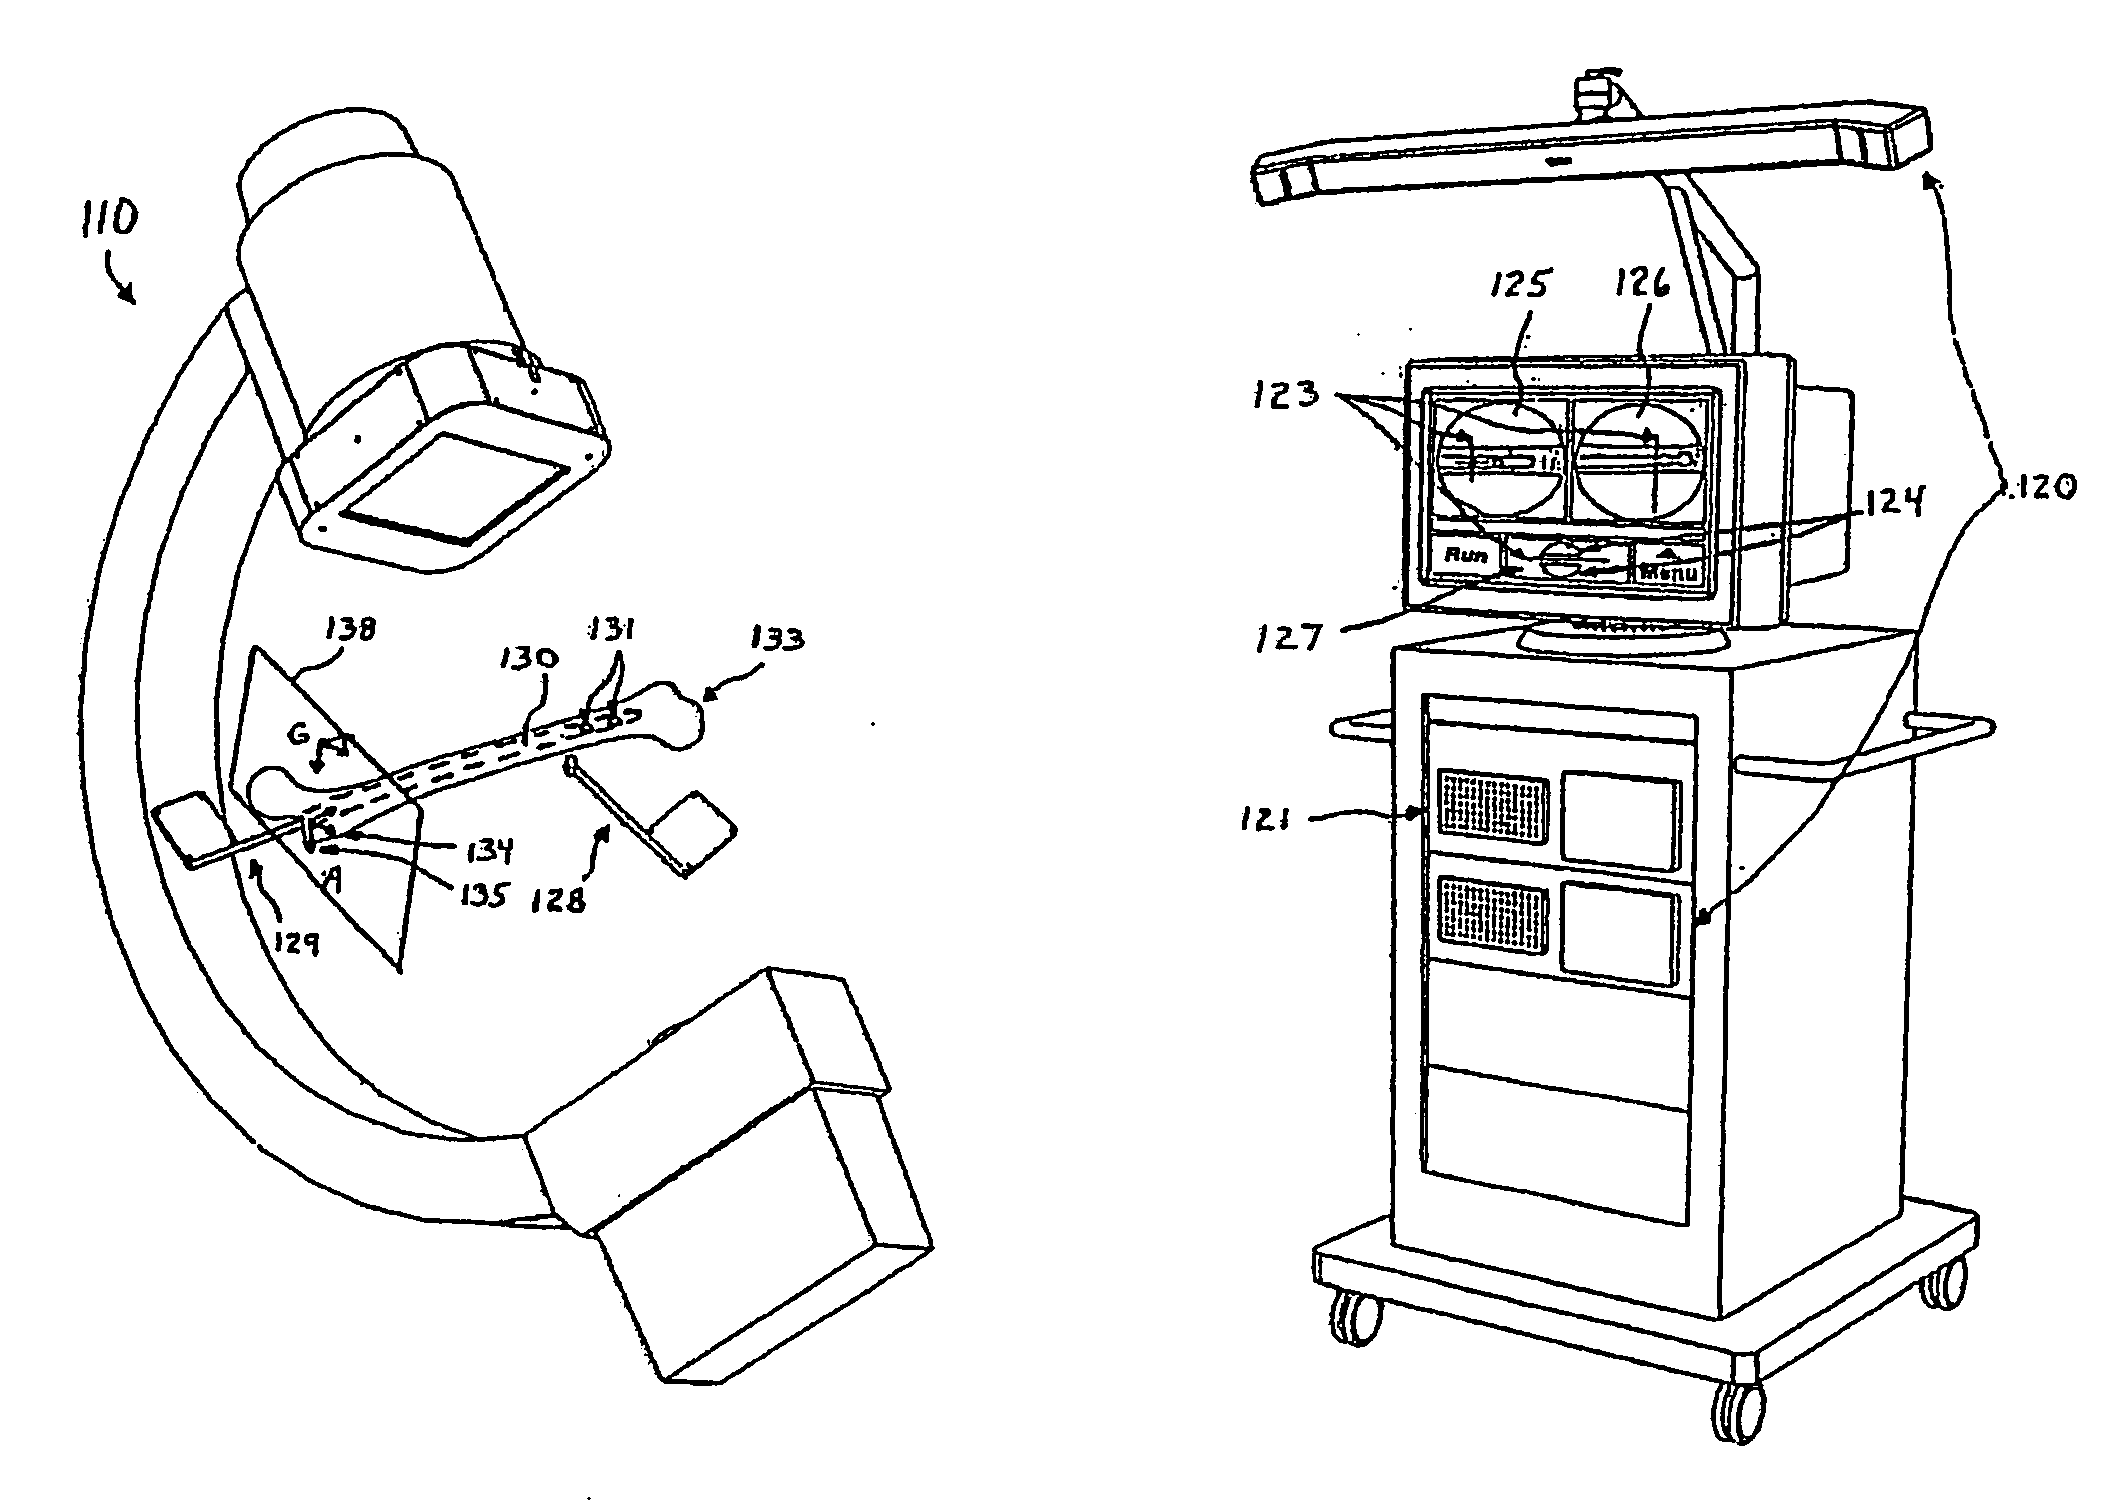 Apparatus and method for improving the accuracy of navigated surgical instrument